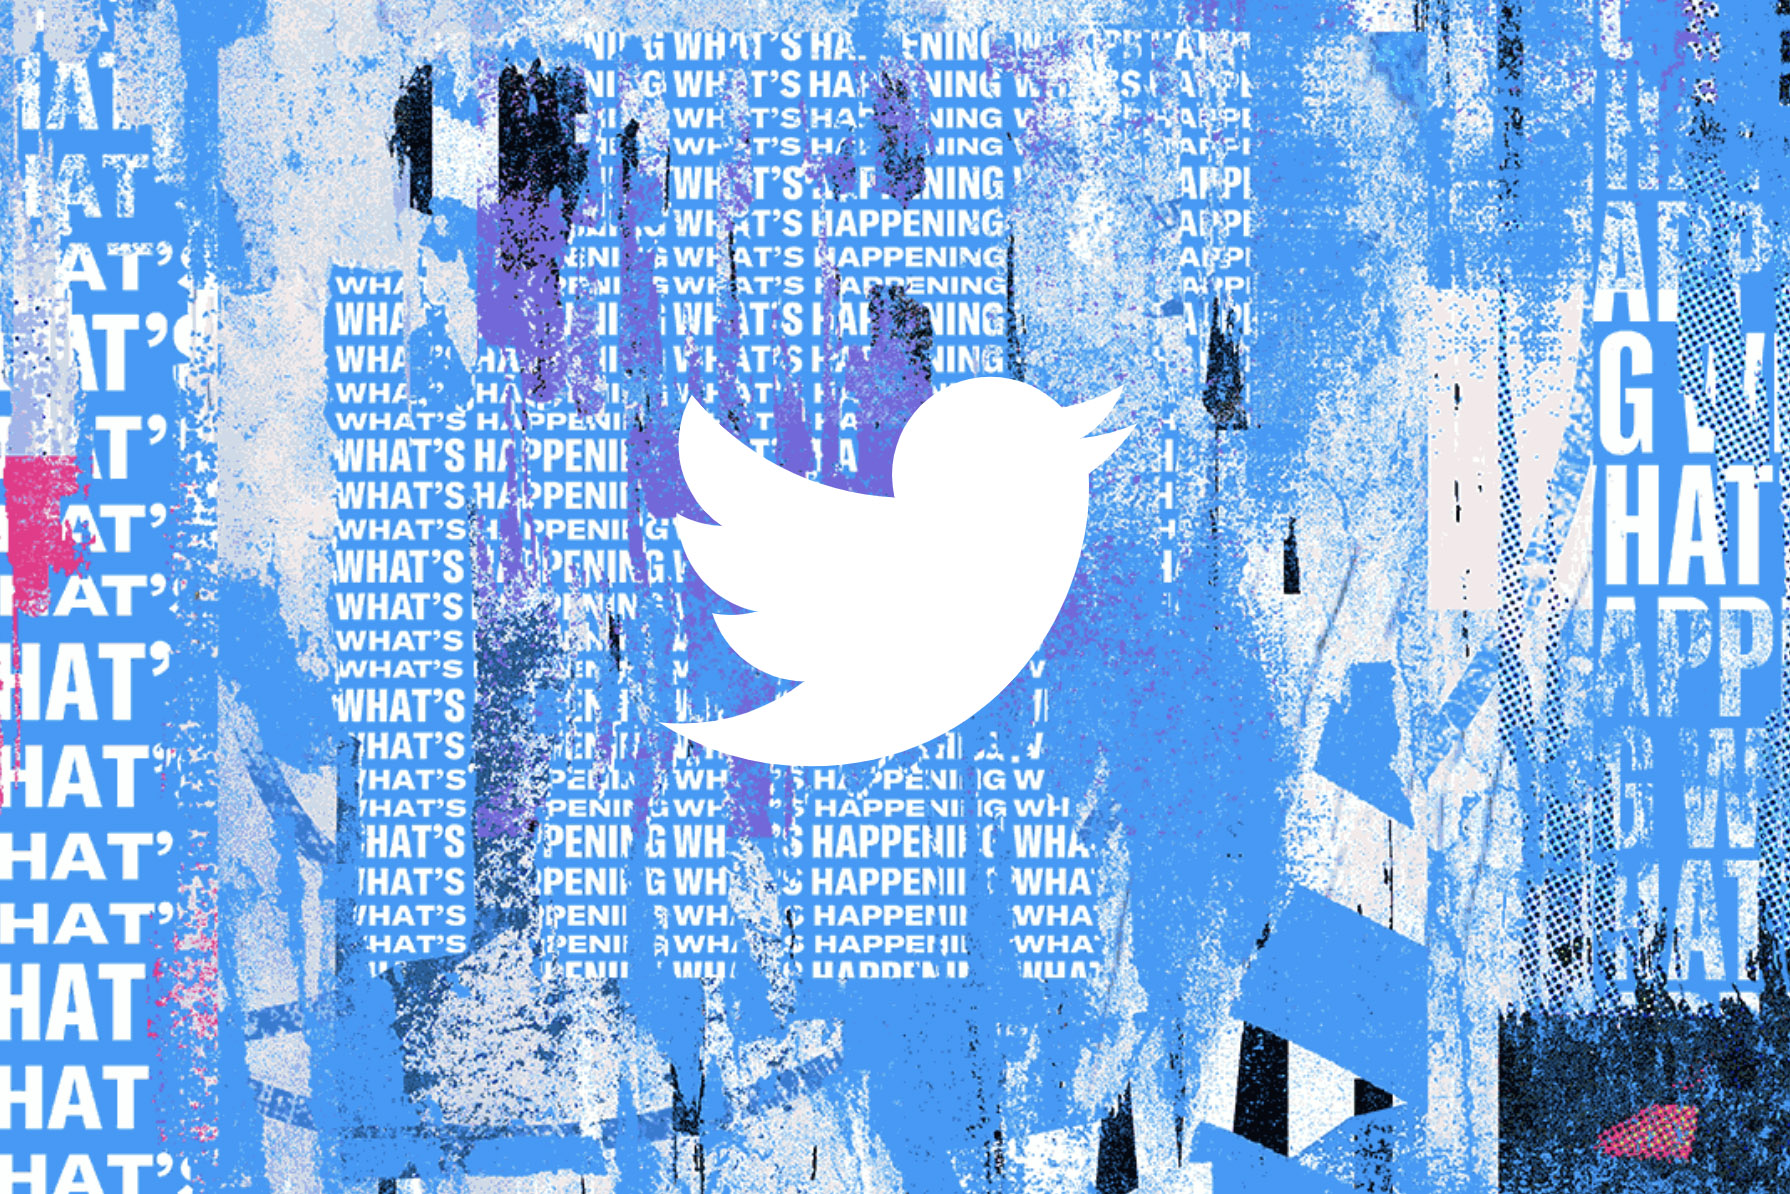 Something’s happening with Twitter’s most active
users